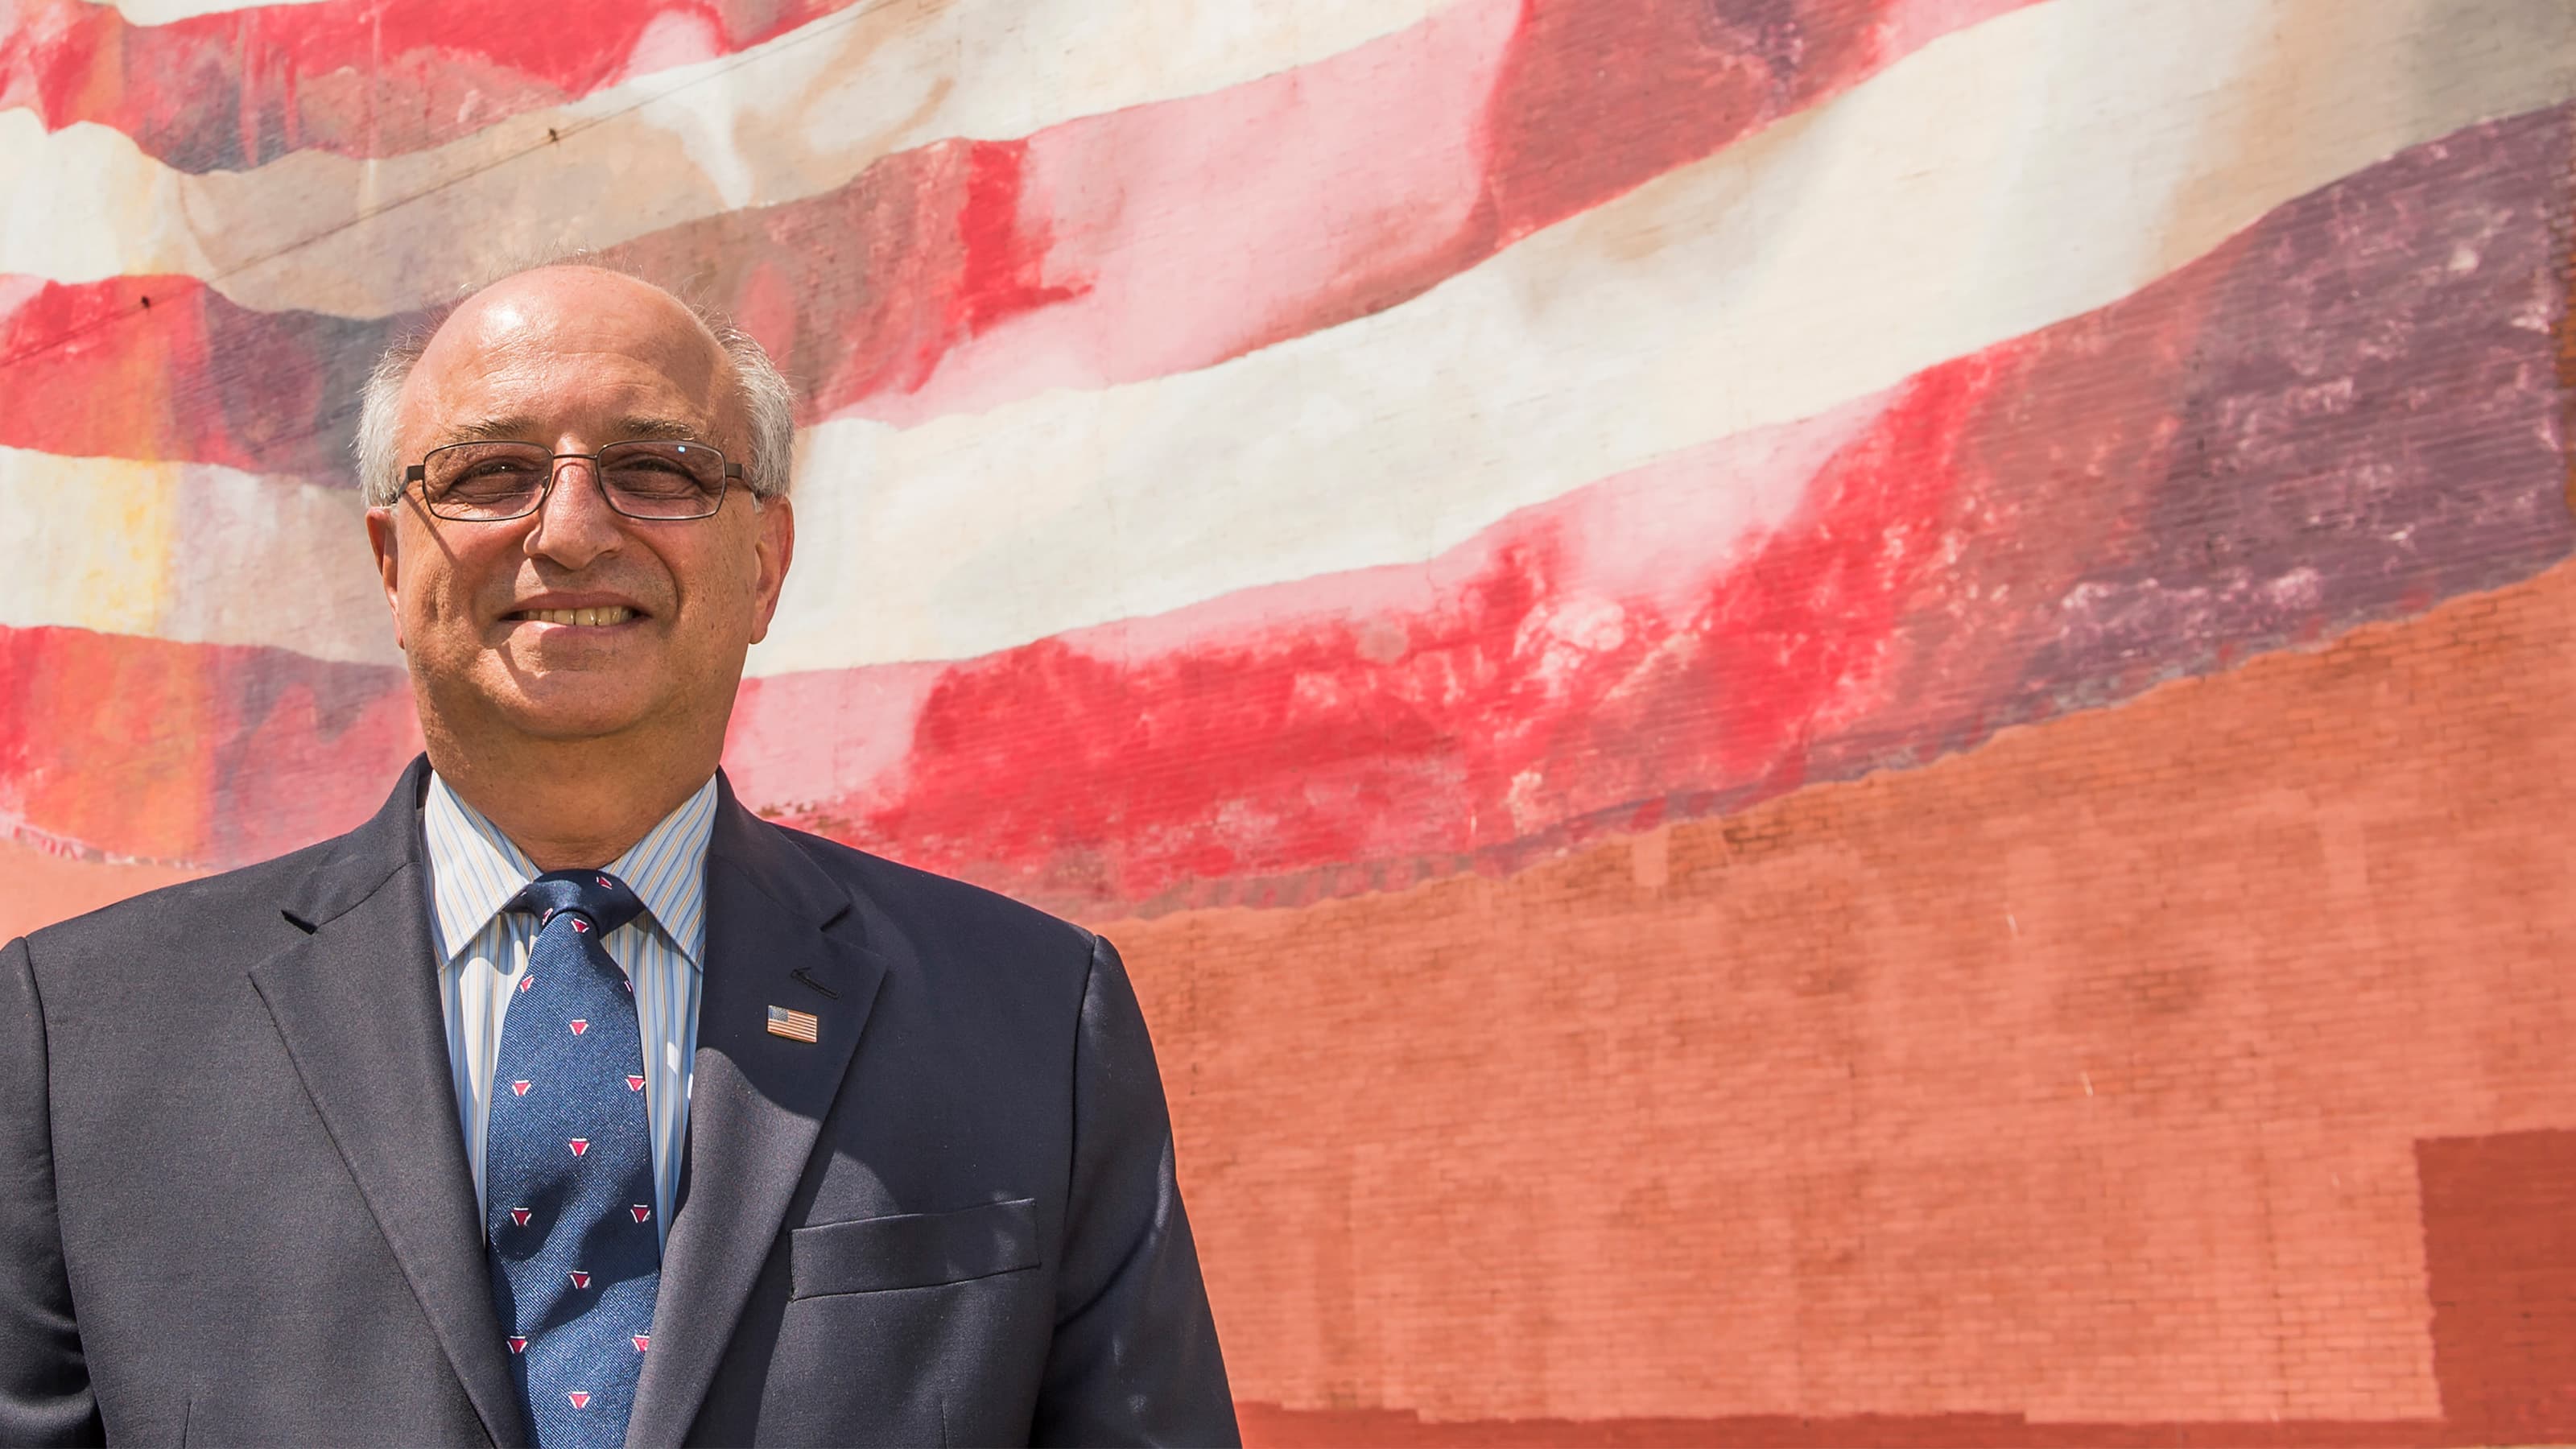 Ralph Galati '70 standing in front of an American flag mural